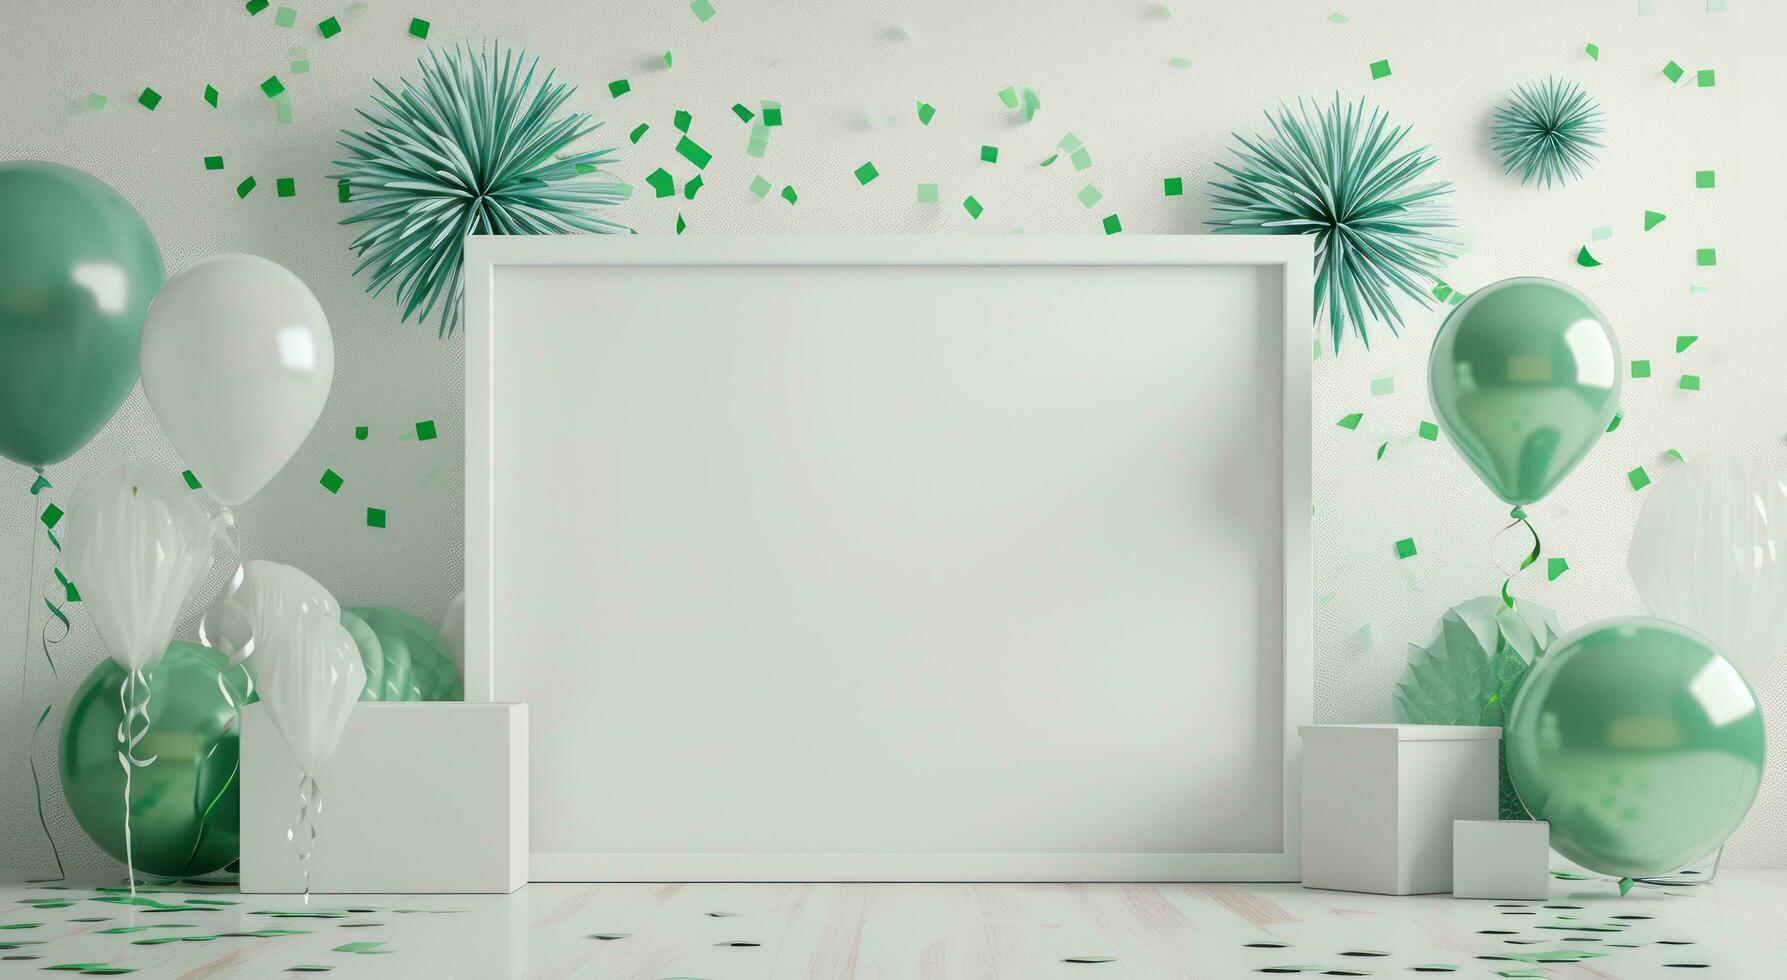 AI generated a white frame on the wall in front of green and white fireworks and confetti photo